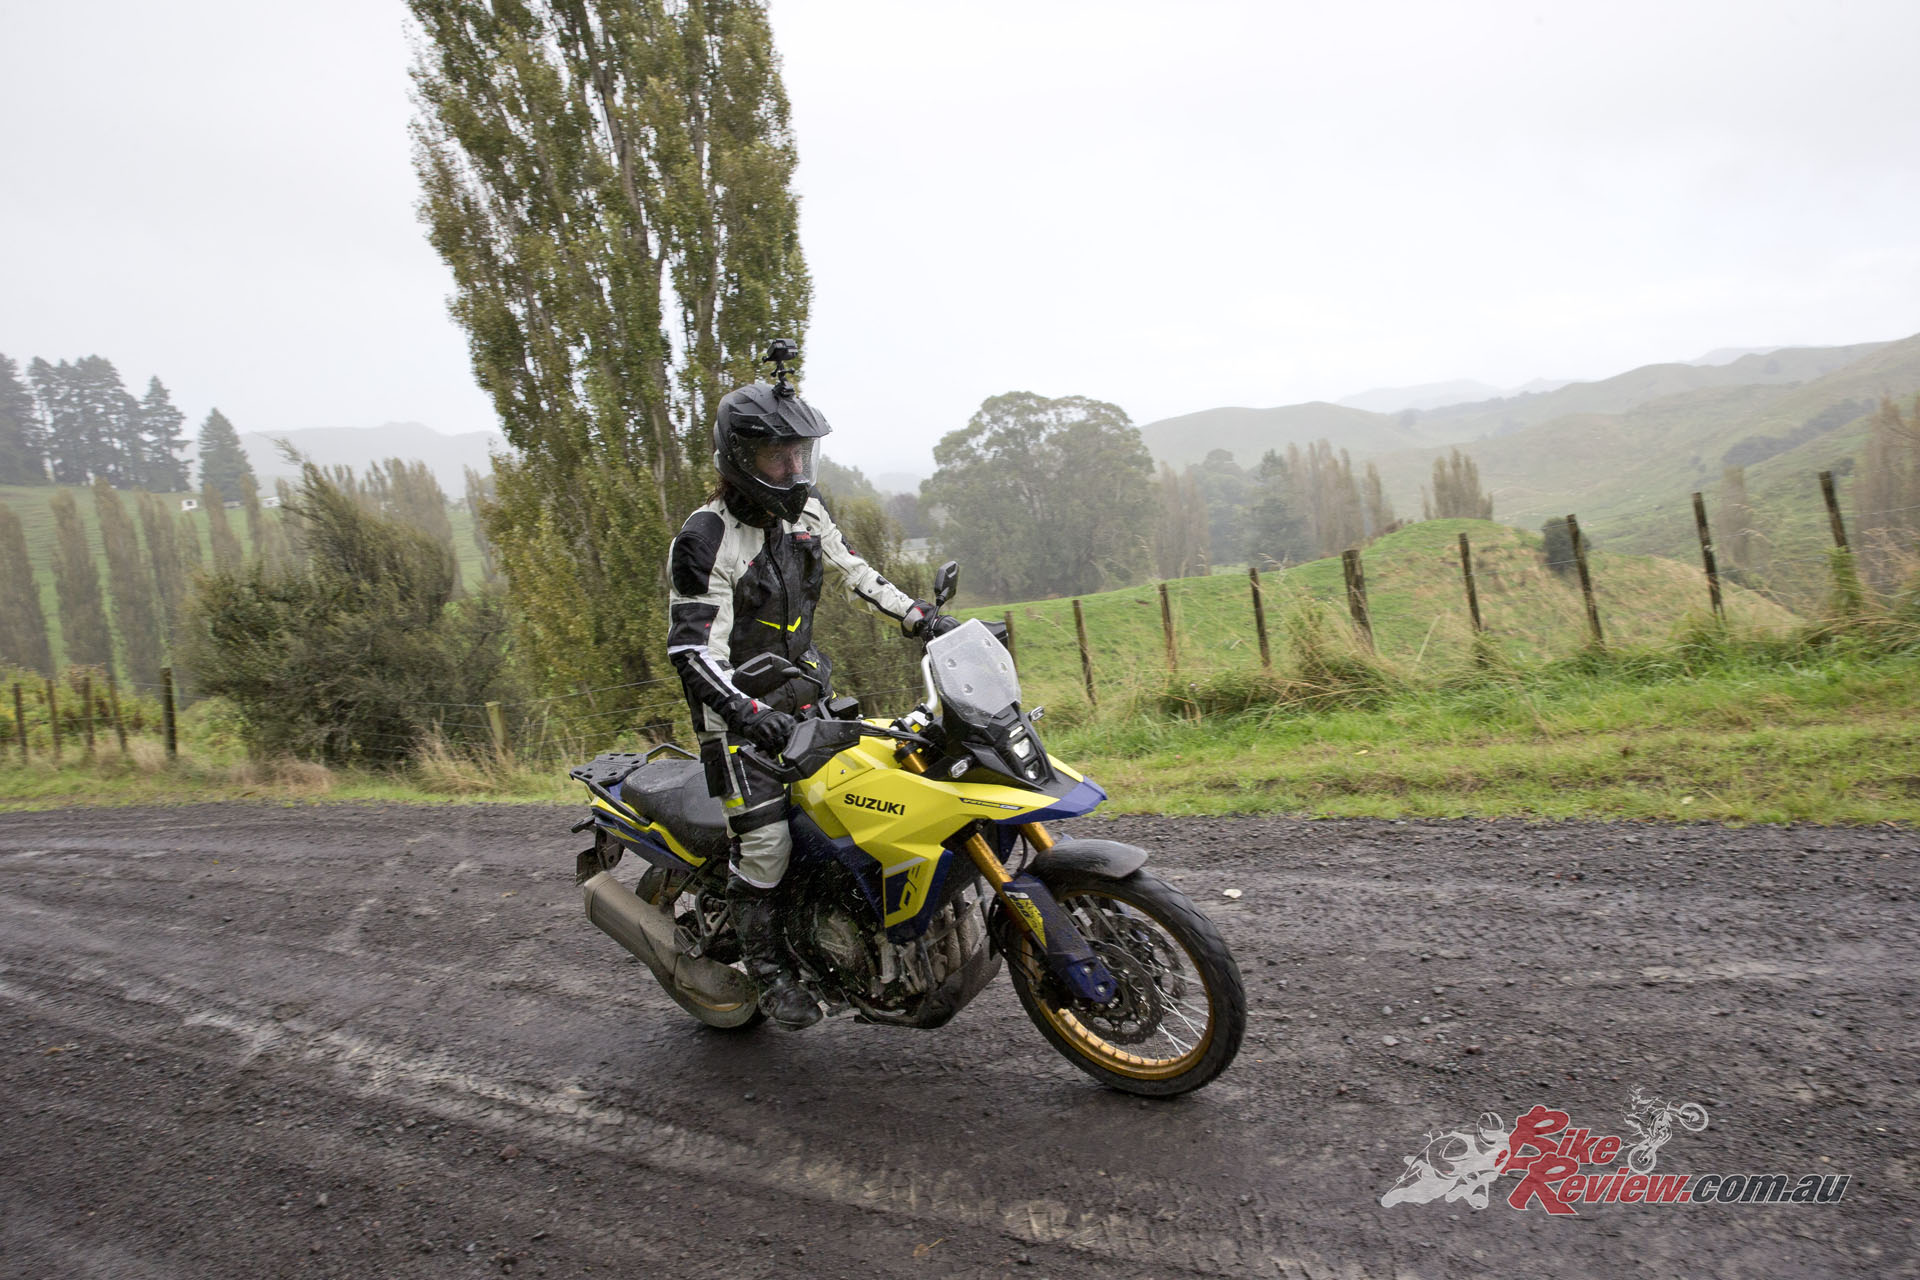 Switching to a lower power mode made the V-STROM 800DE a lot easier to handle in slippery conditions.